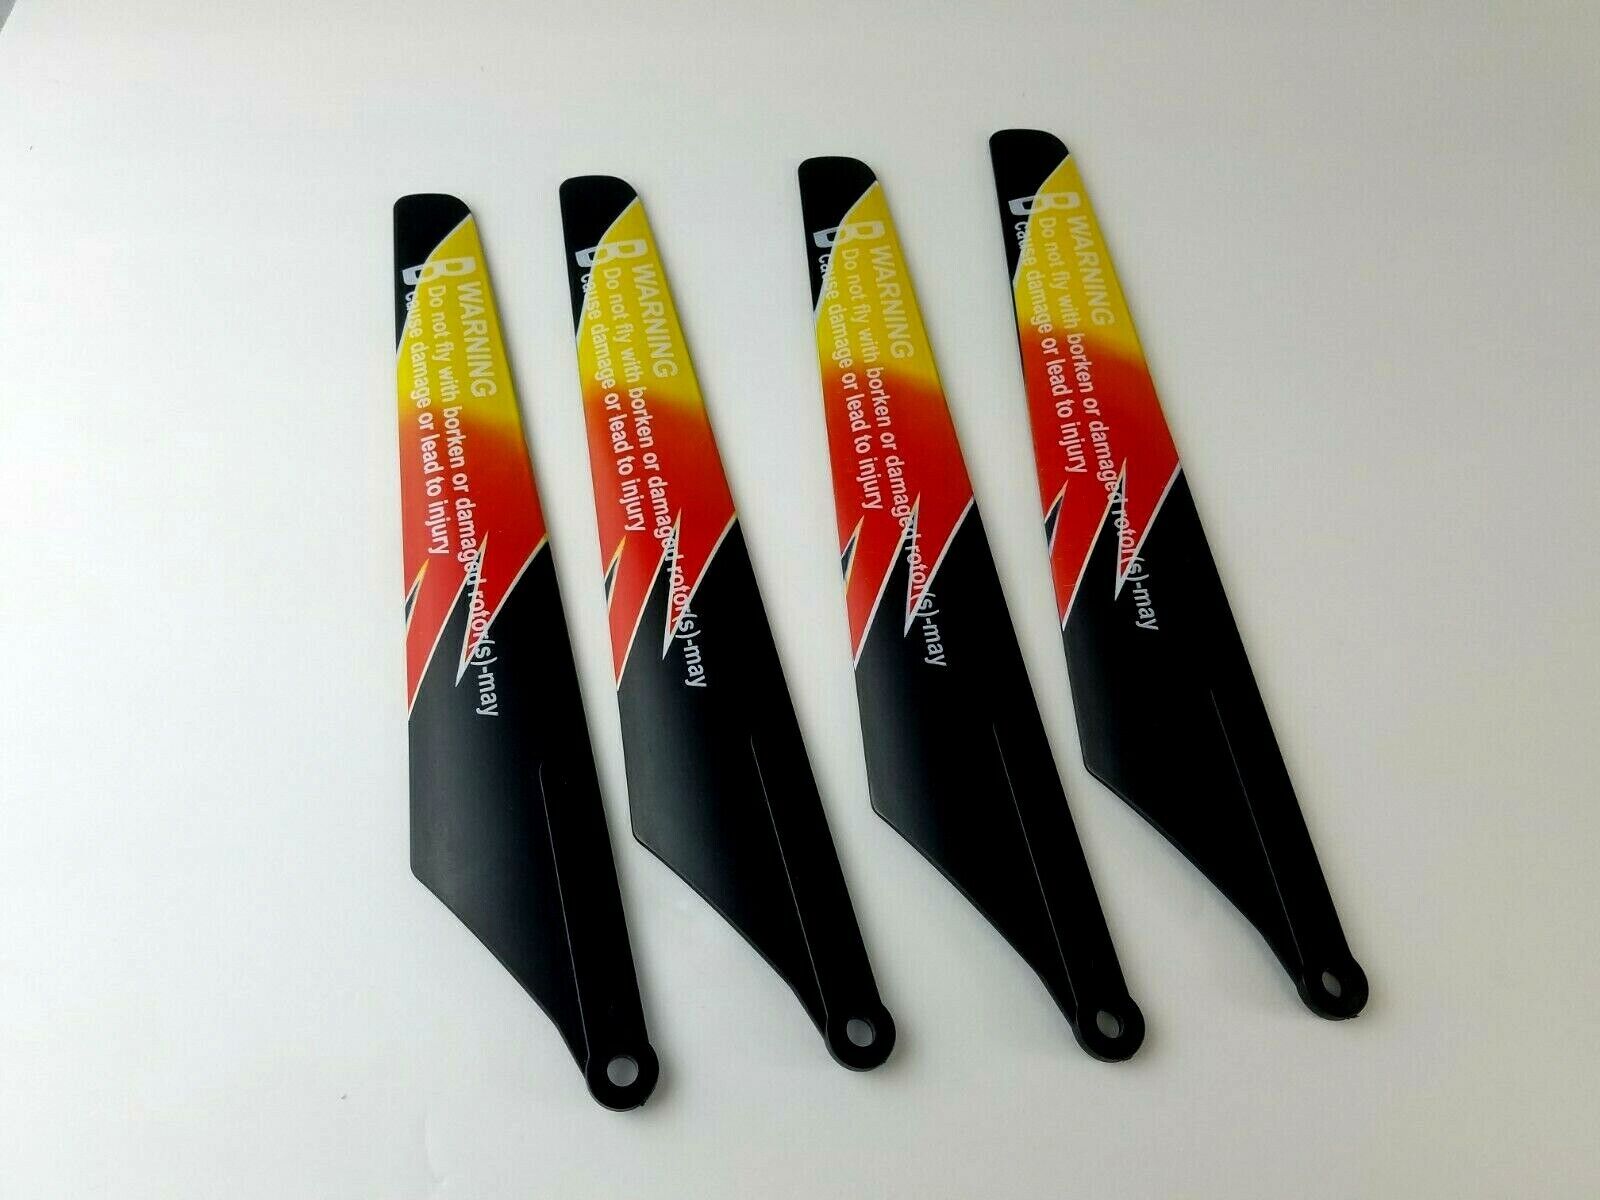 2.4G Brushless RC Helicopter Spare Parts Main Blade for Wltoys V913-07 